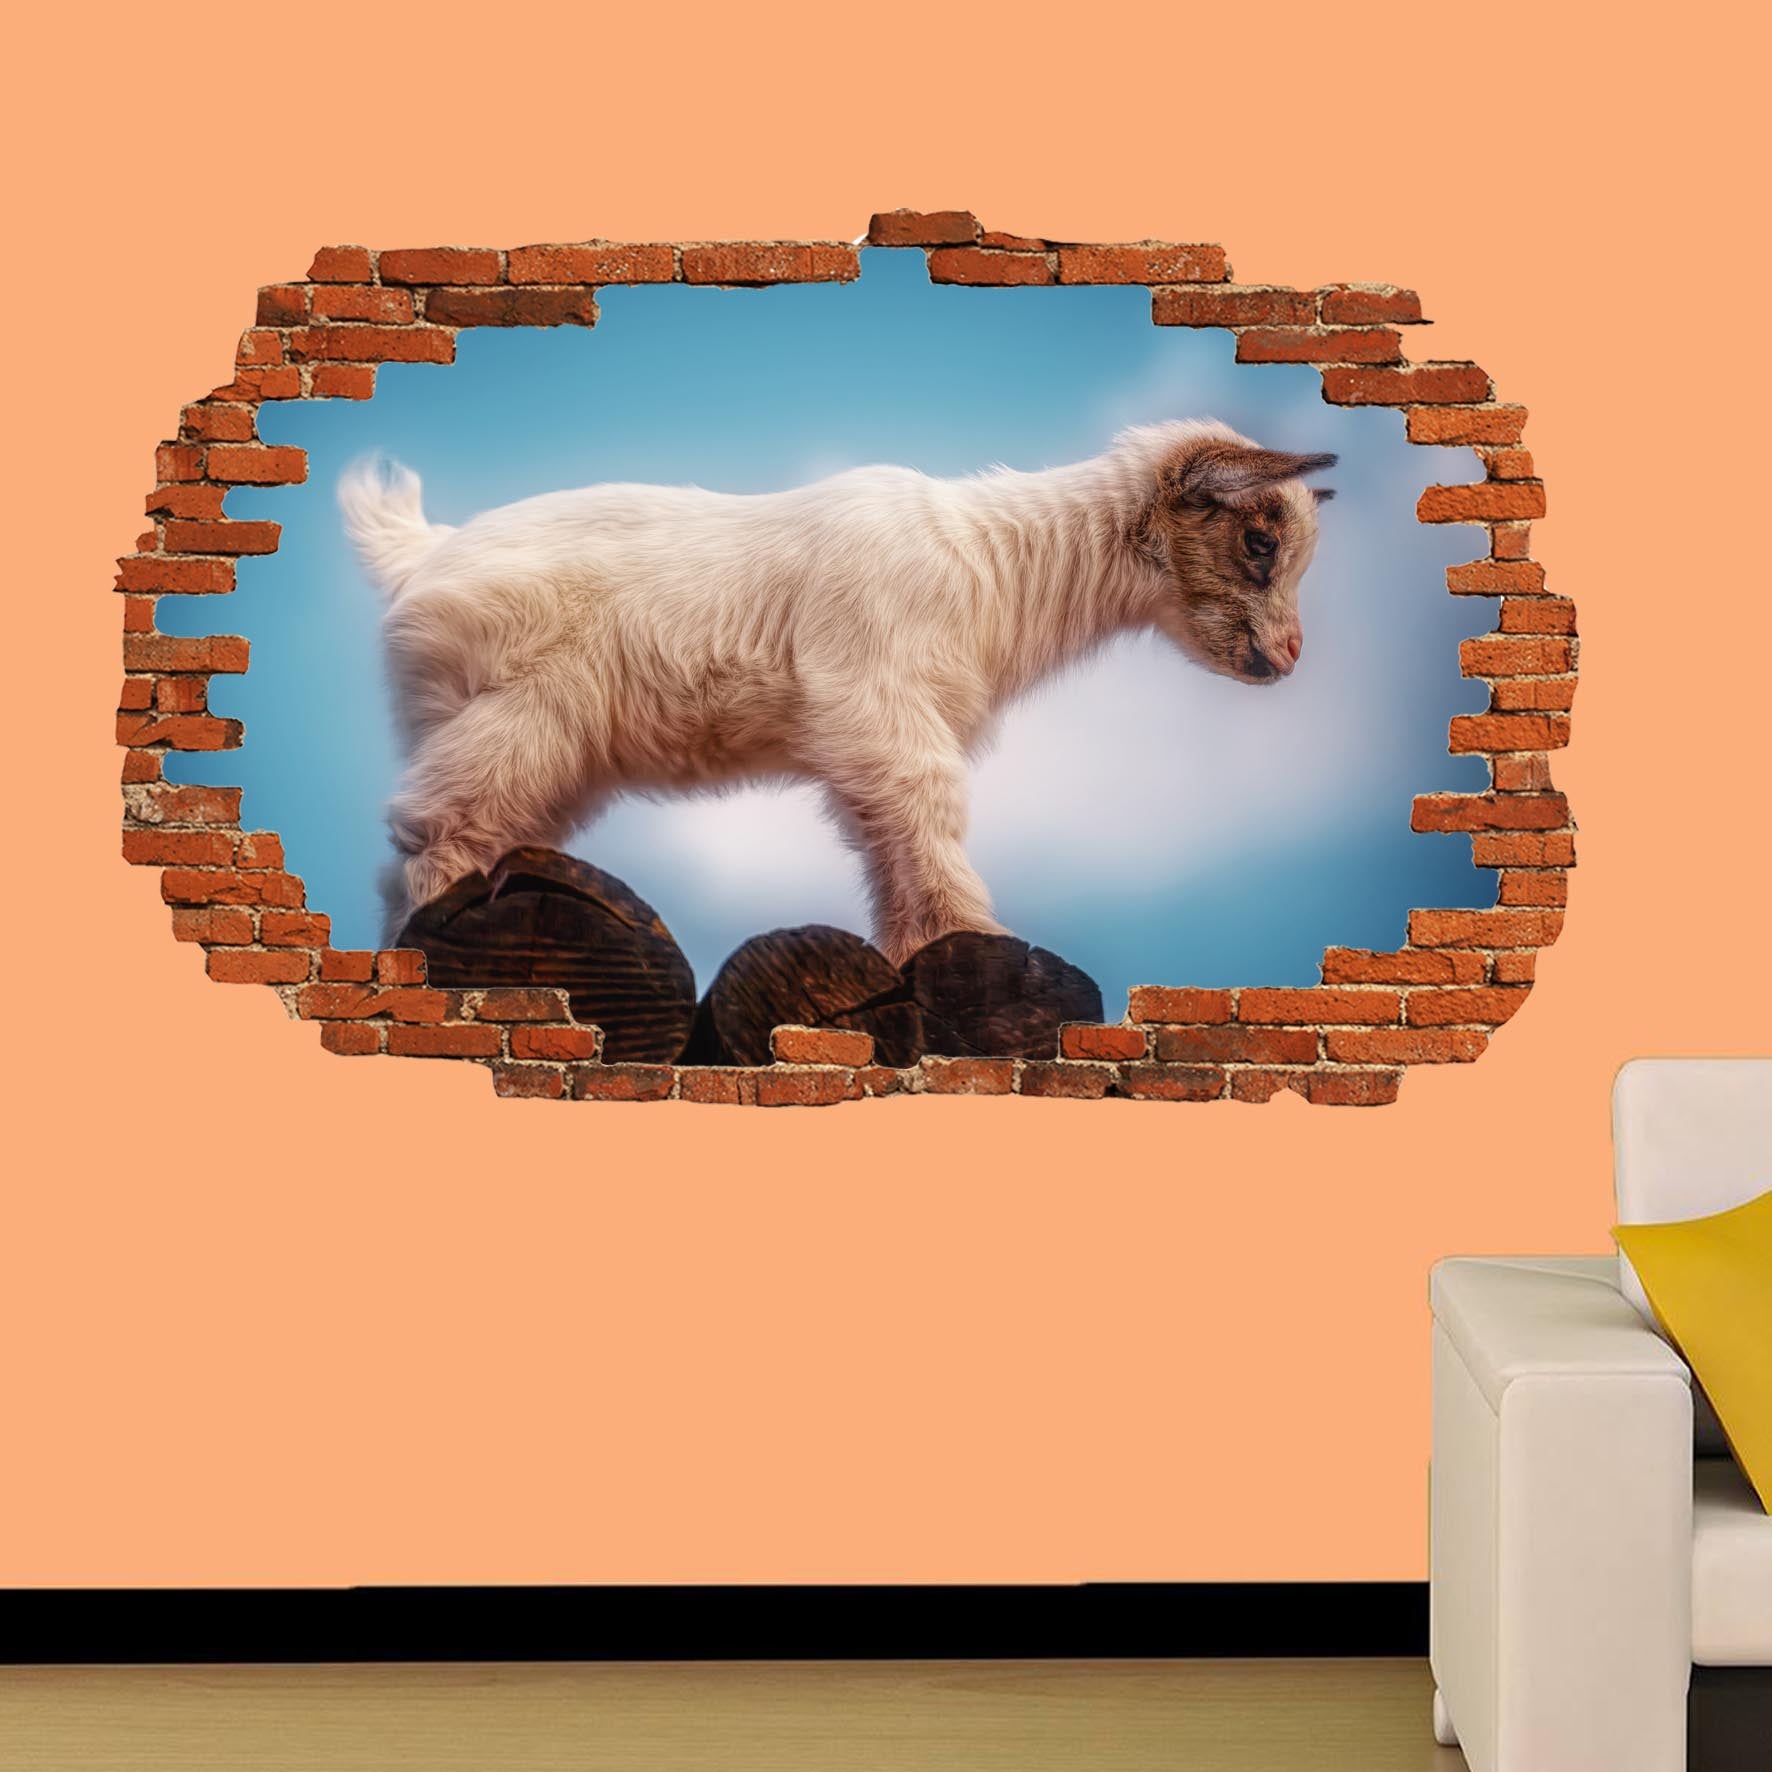 Baby Goat Wall Sticker Poster Decal Mural